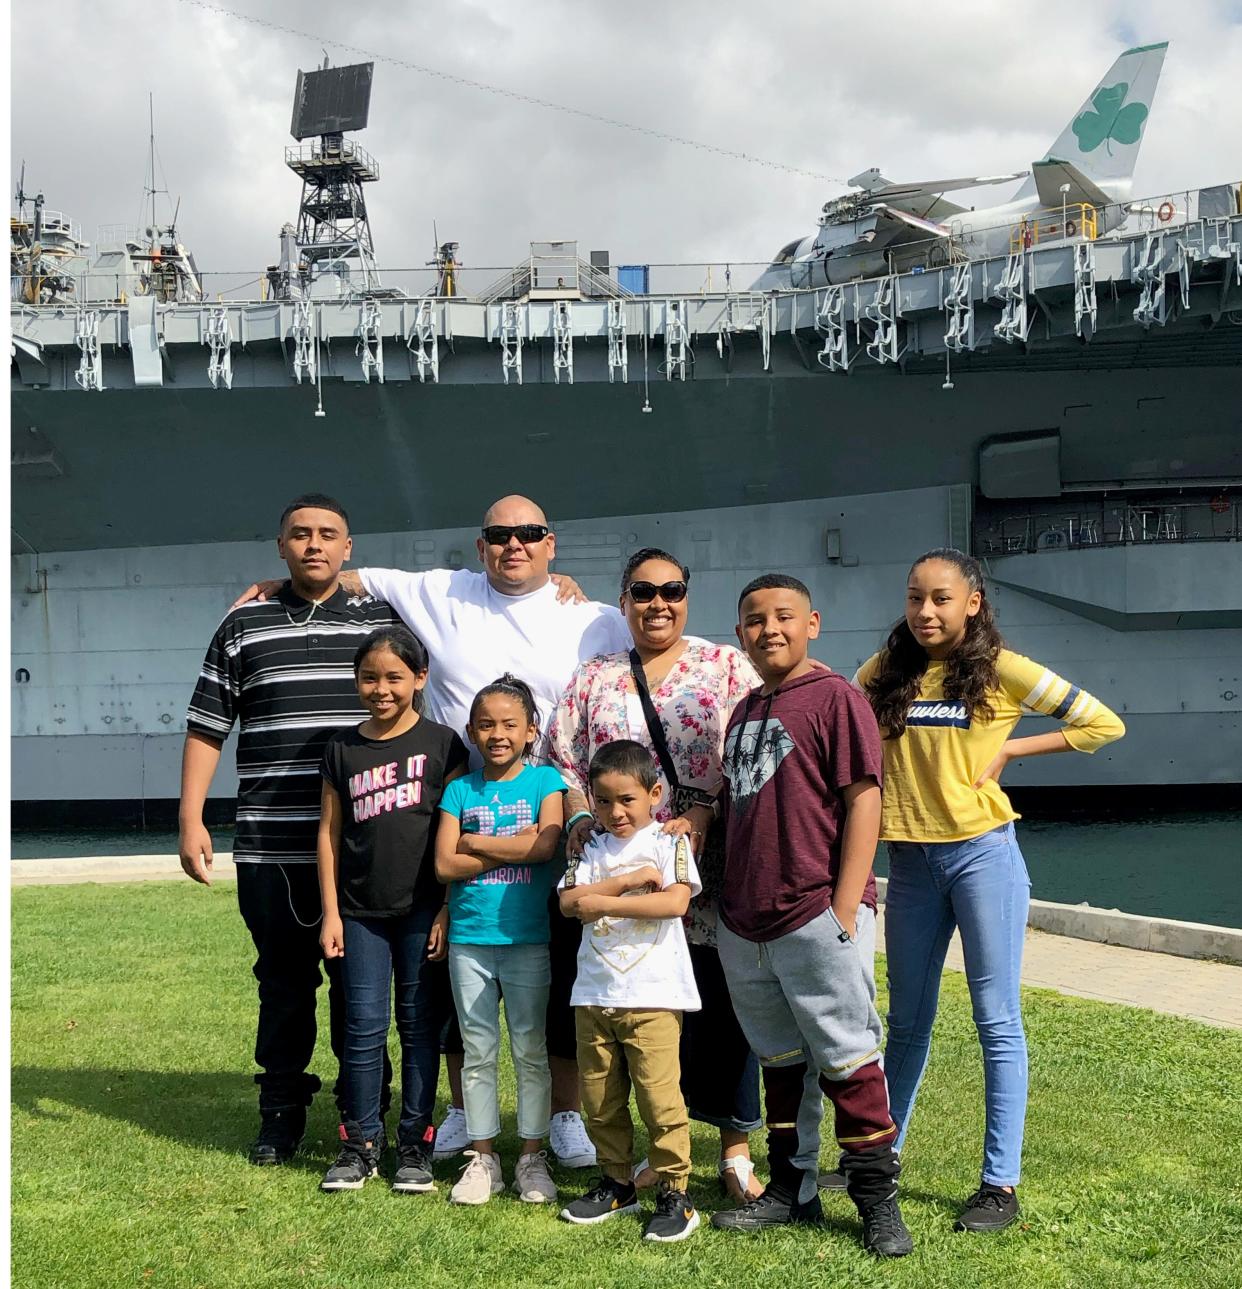 A 2019 photo shows Iliah Miguel, second from the right, with his family. Iliah Miguel, 14, was part of a group of people who rushed to help the victim of a shooting at the Oklahoma State Fair.